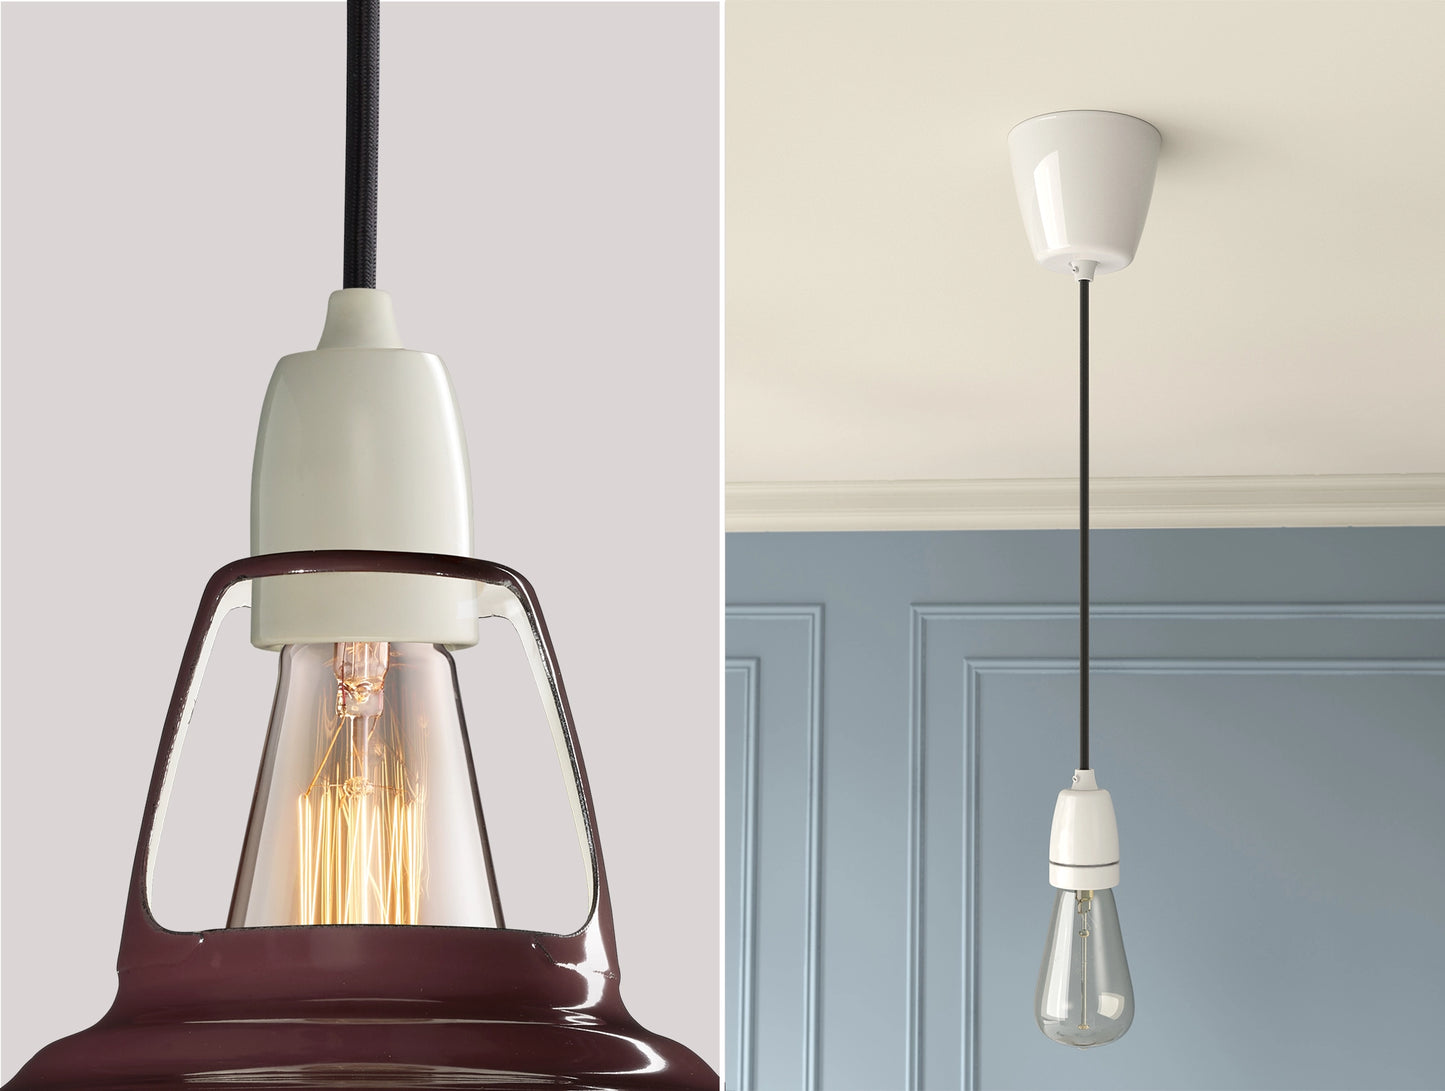 Close up of an E27 Porcelain suspension set on a Metropolitan lampshade on the left. On the right, an E27 Porcelain pendant set with a lightbulb is hanging from the ceiling